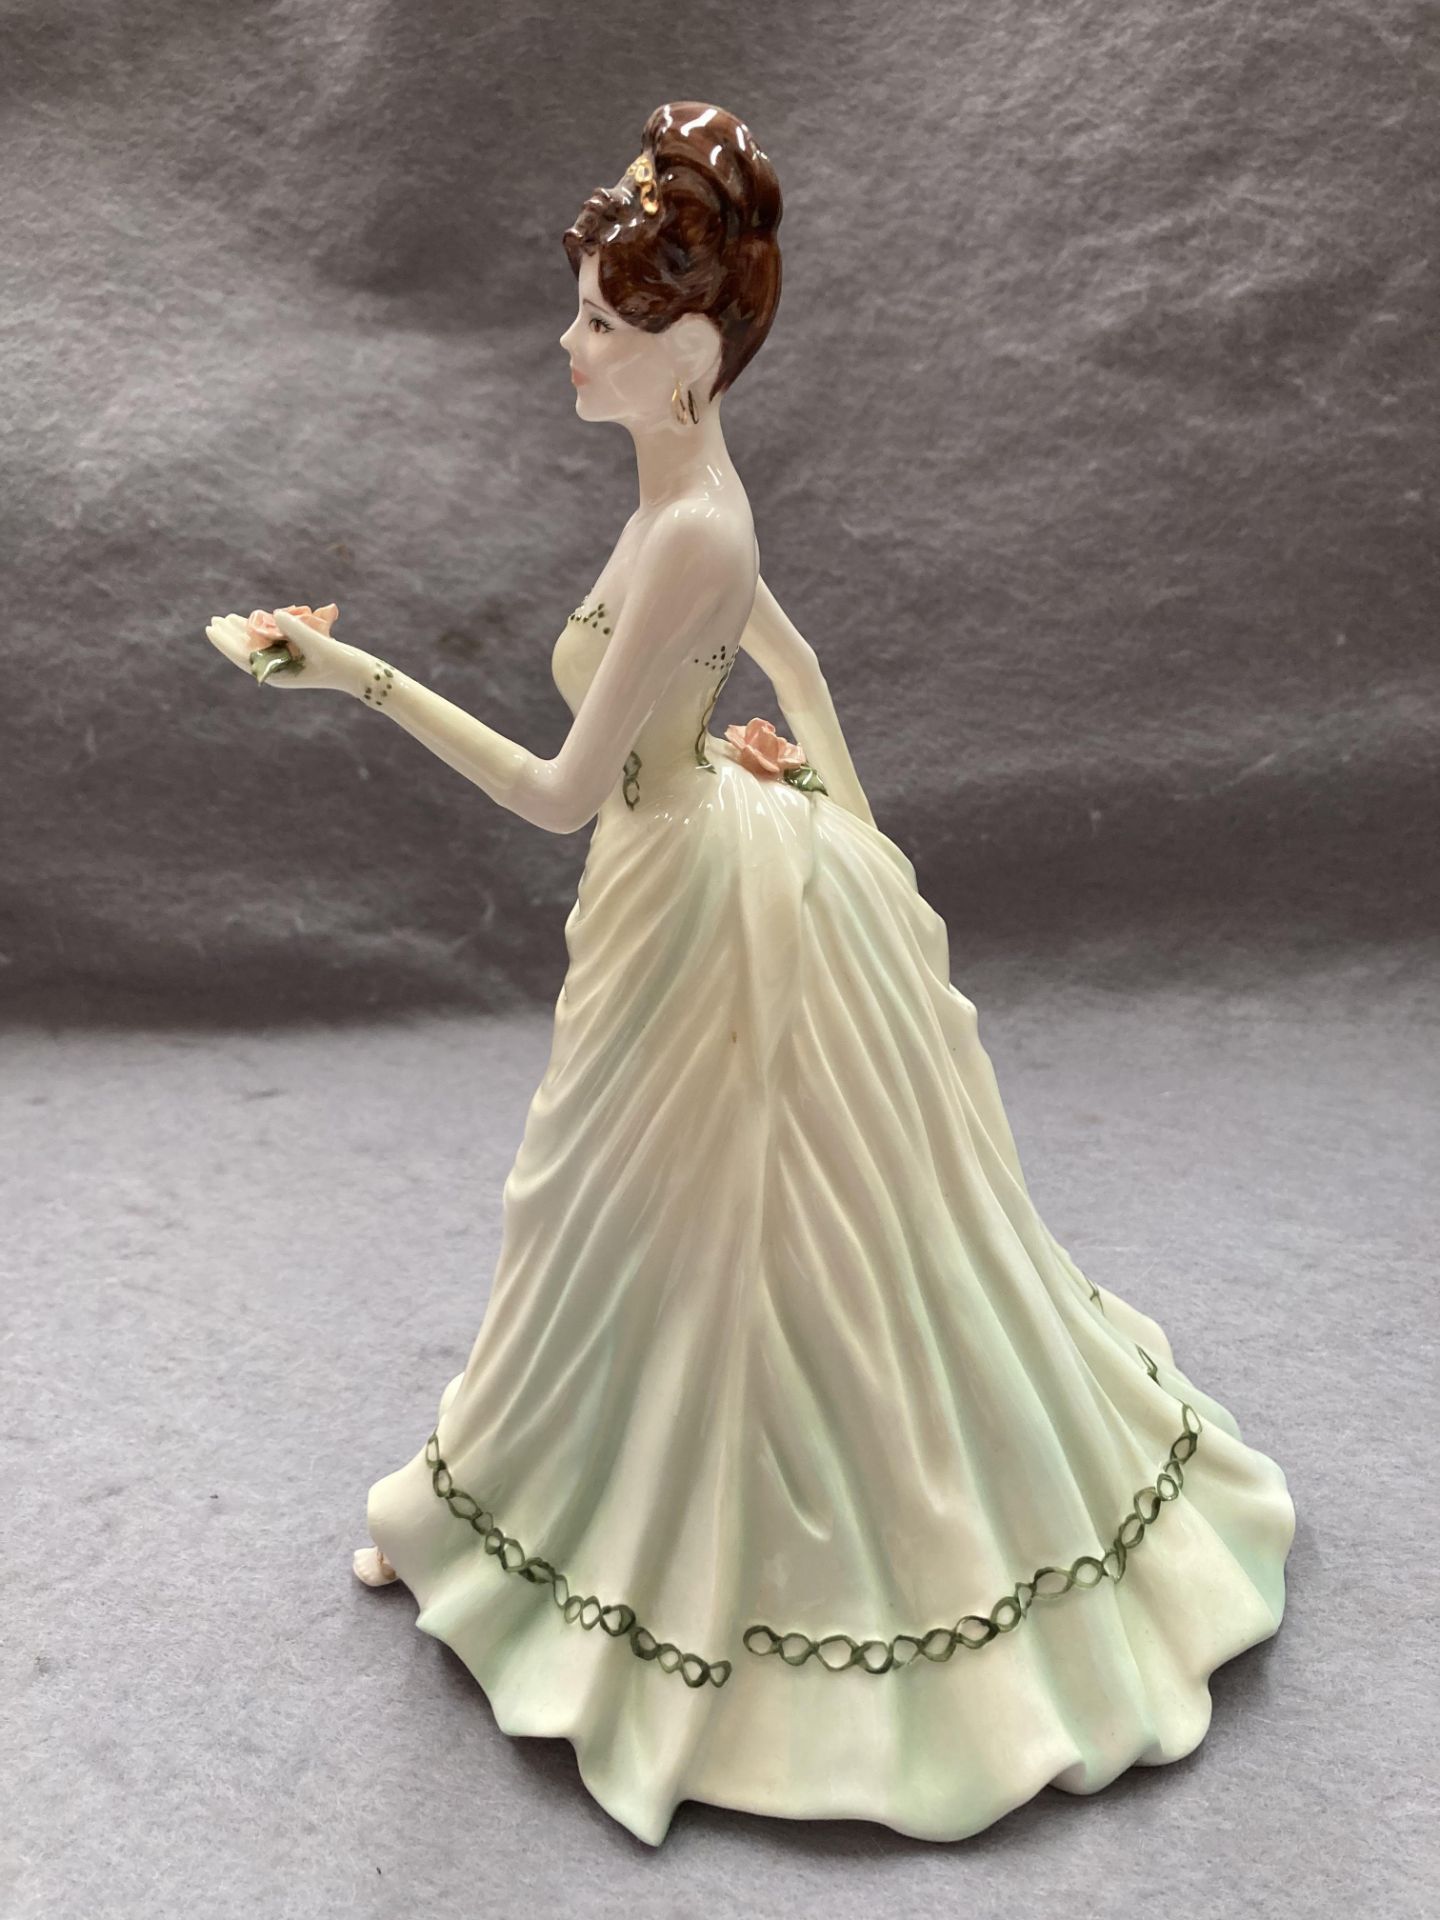 Six Coalport bone china and porcelain figurines - Congratulations, Togetherness Mother's Day, - Image 22 of 34